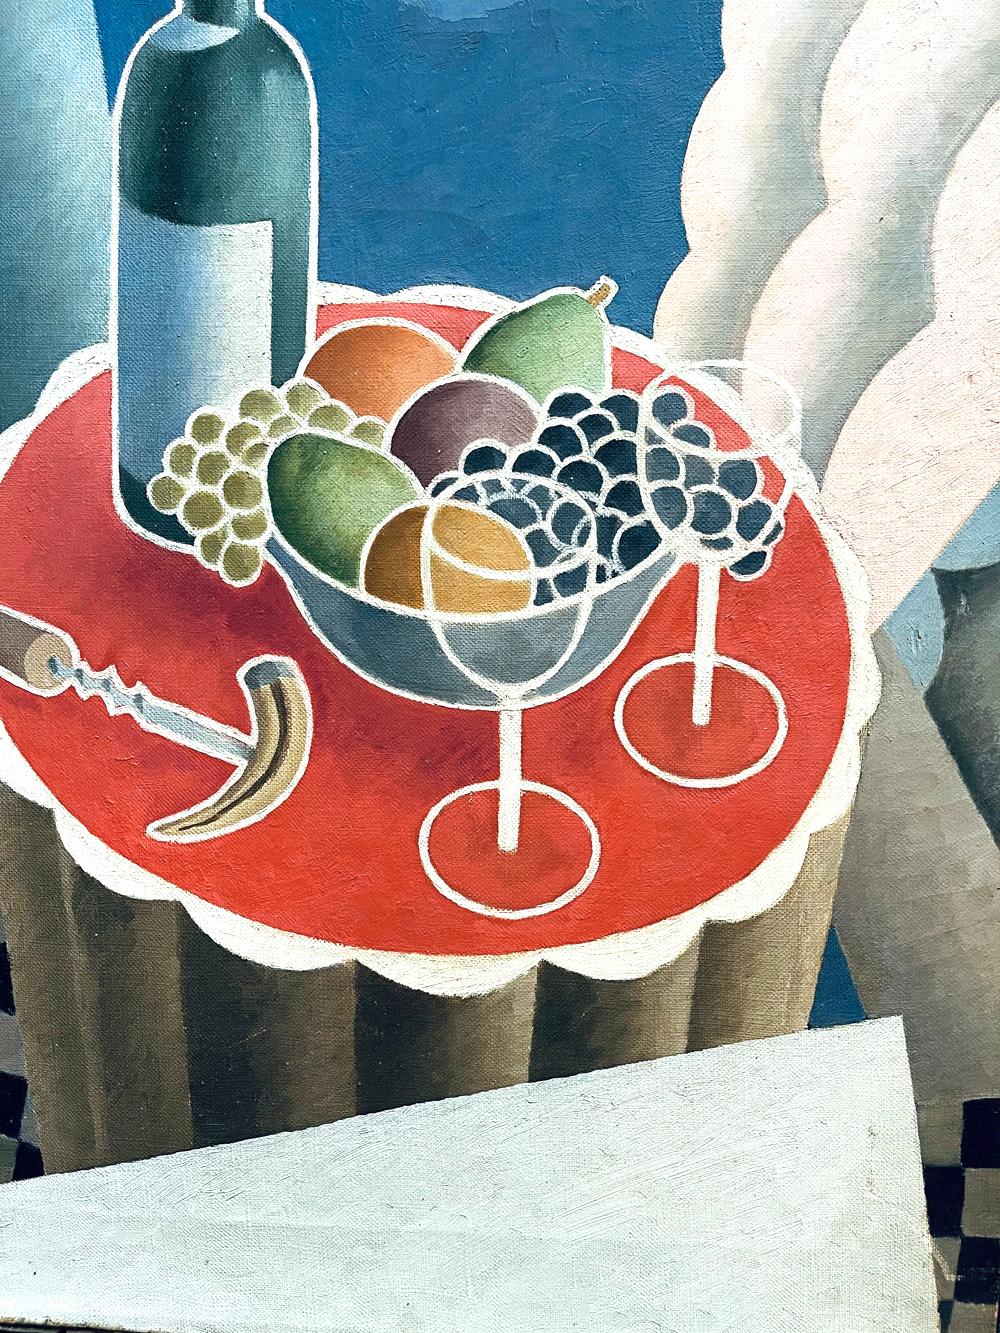 Clearly showing the influence of French Cubism and Art Deco, this gorgeous, brilliantly-hued painting depicts a bottle of wine, a bowl of fruit, a wine bottle opener and wine glasses, all on a tilted table with fluted sides that is framed by